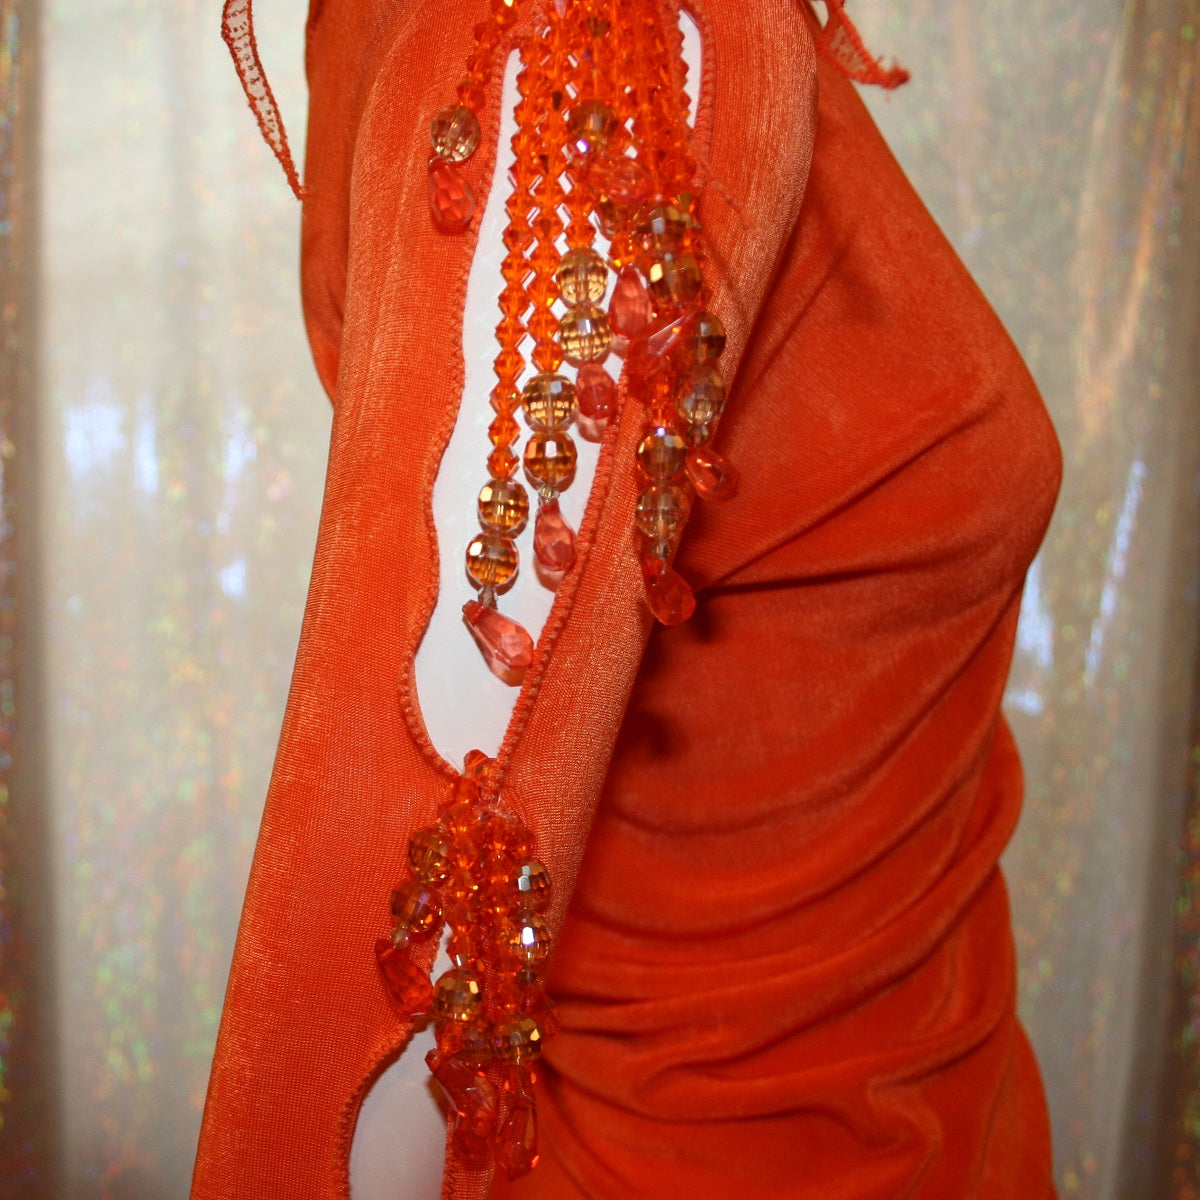 Crystal's Creations close up view of Orange Latin/rhythm dress was created in luxurious orange solid slinky with oodles of glitter organza flounces & accents, embellished with a touch of Swarovski hand beading.